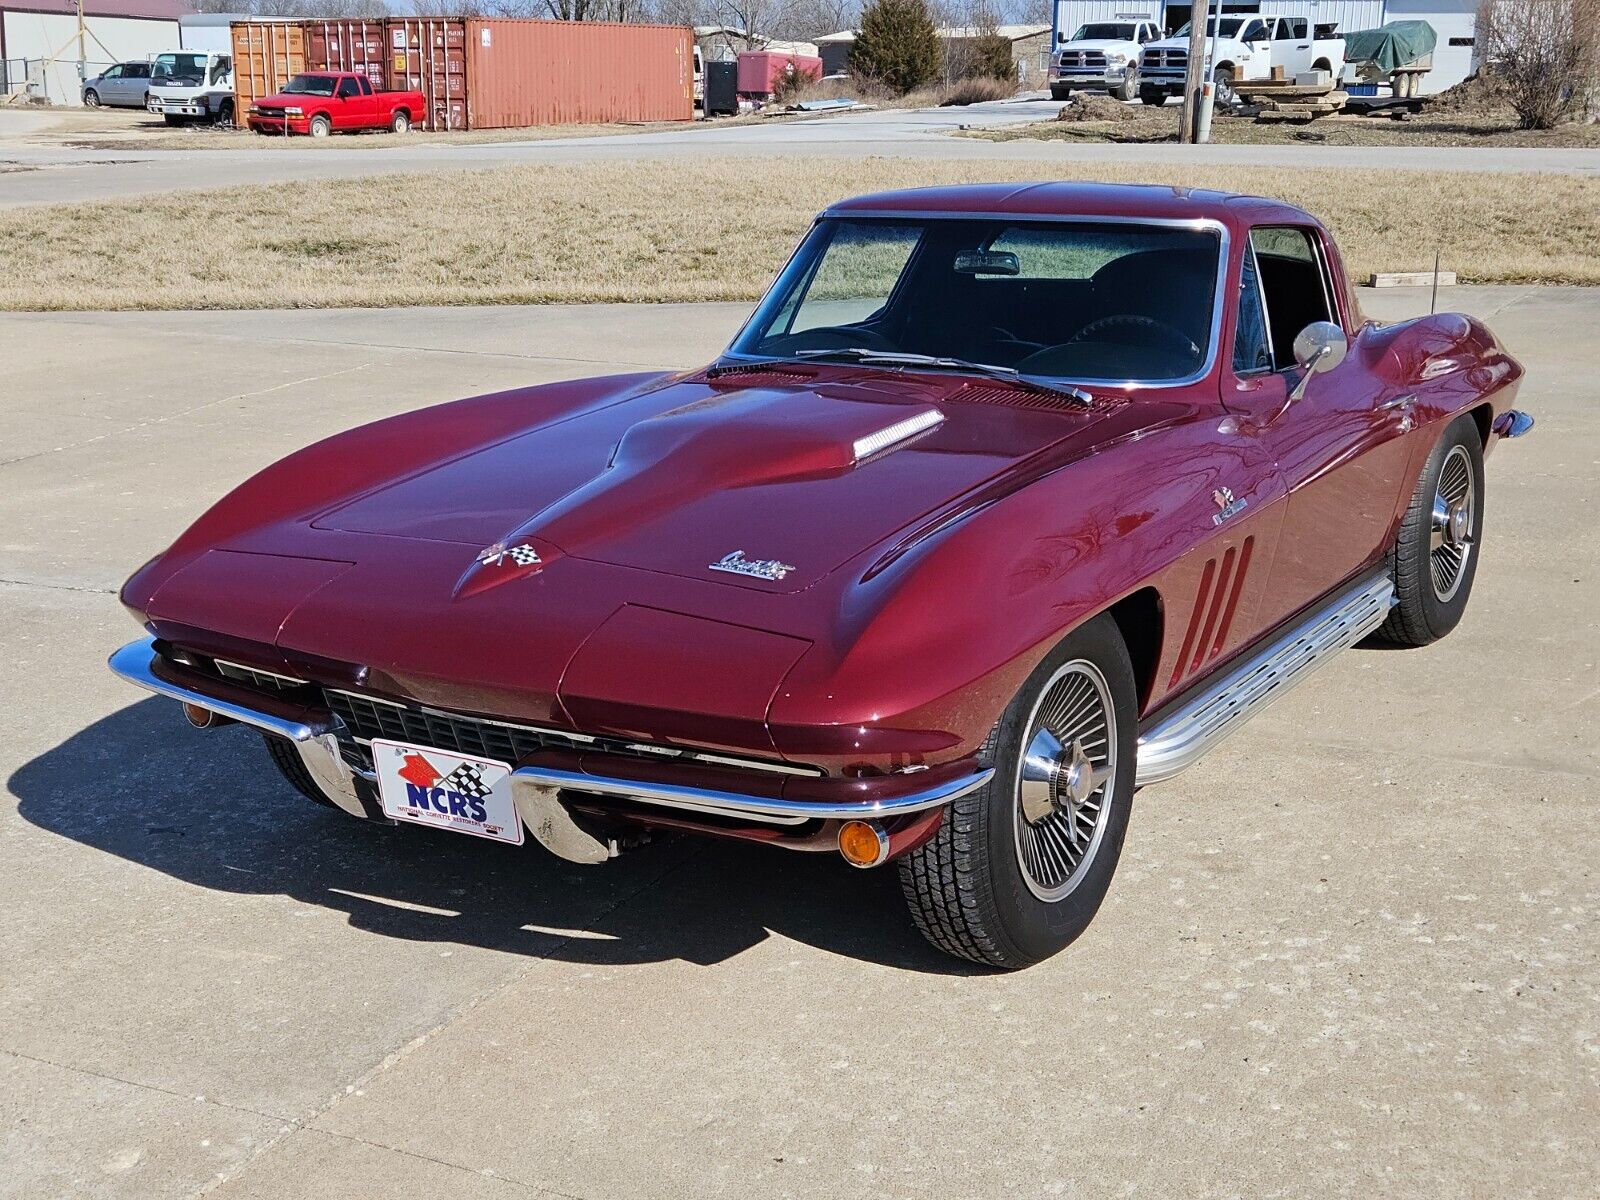 1966 CORVETTE COUPE 427/390HP 4 SPEED, SIDE EXHAUST AND KNOCK OFFS.